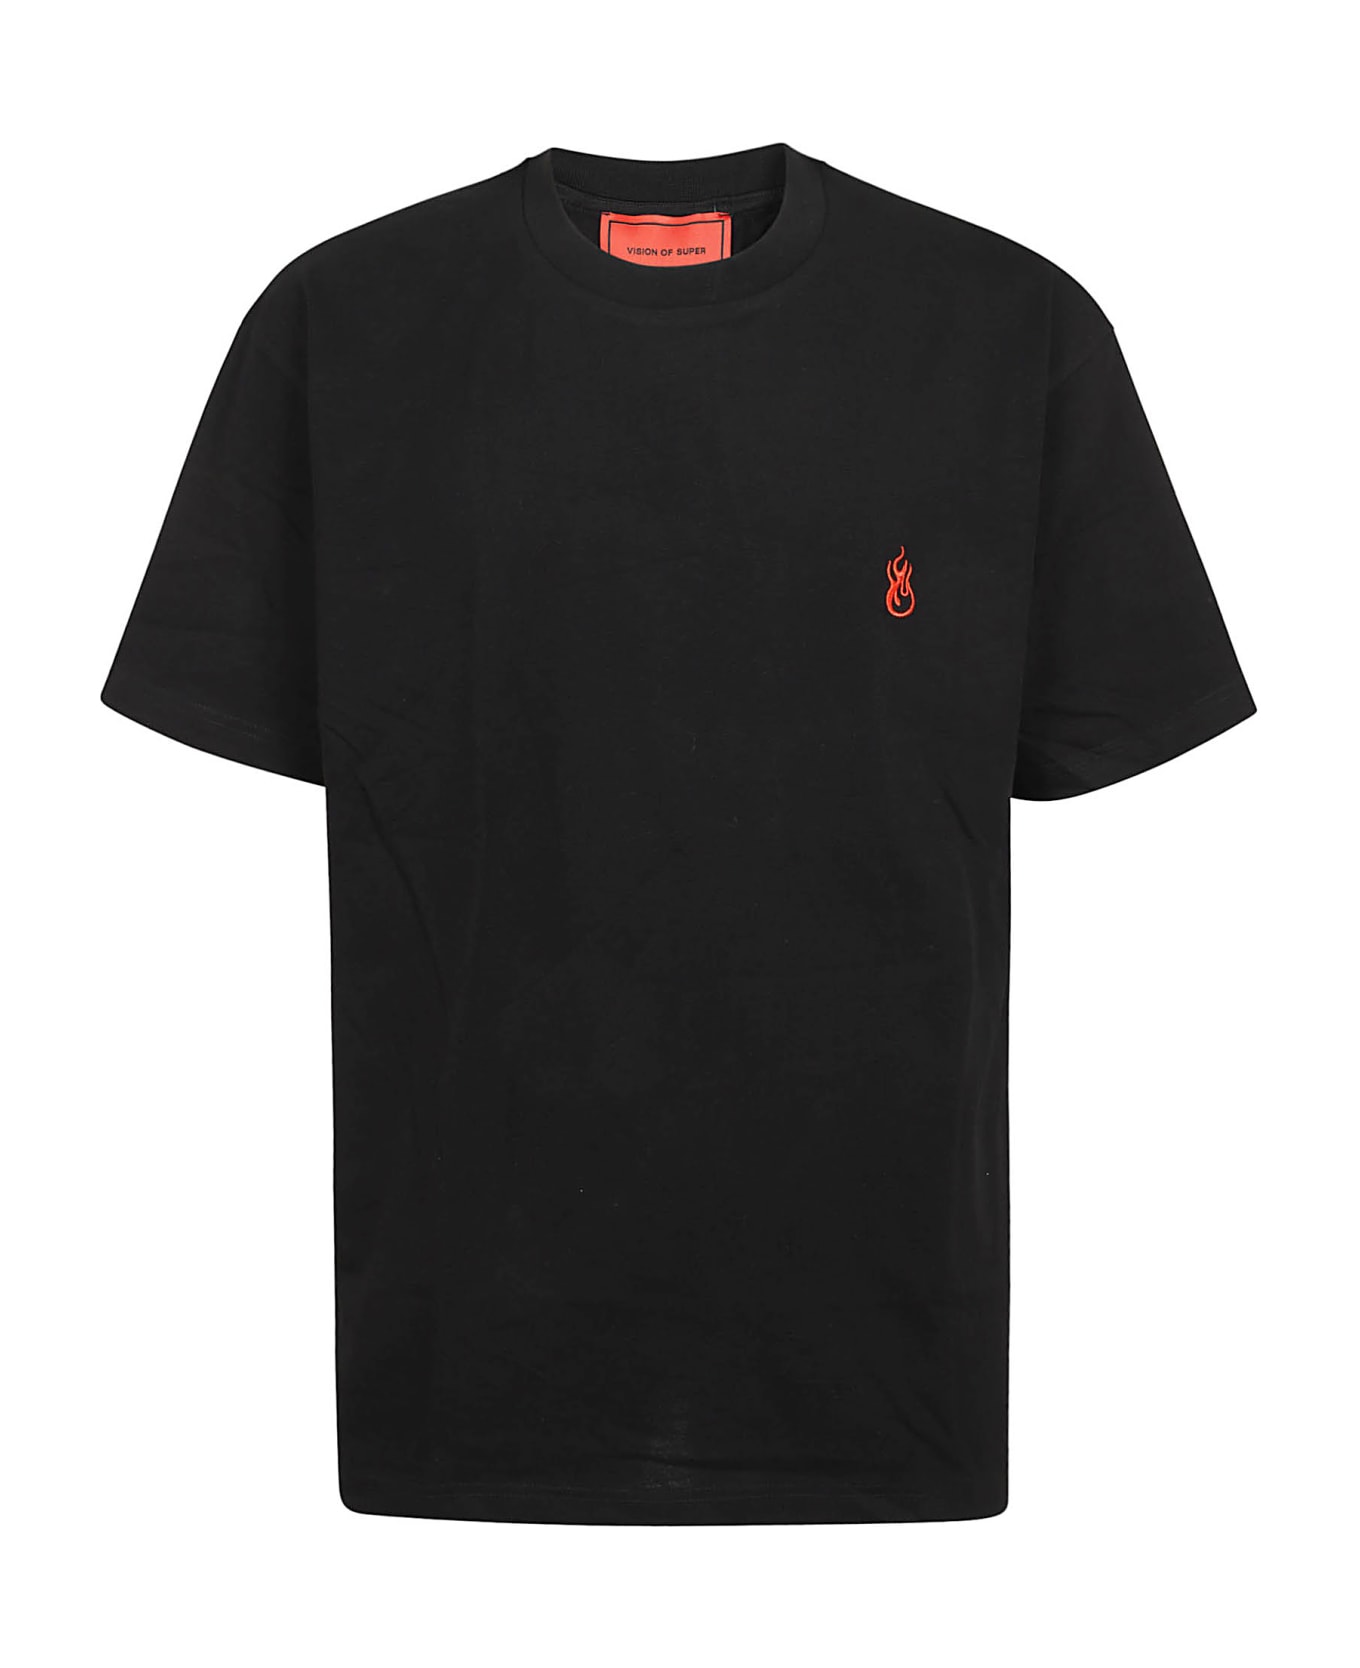 Vision of Super Black T-shirt With Flames Logo And Metal Label - Black